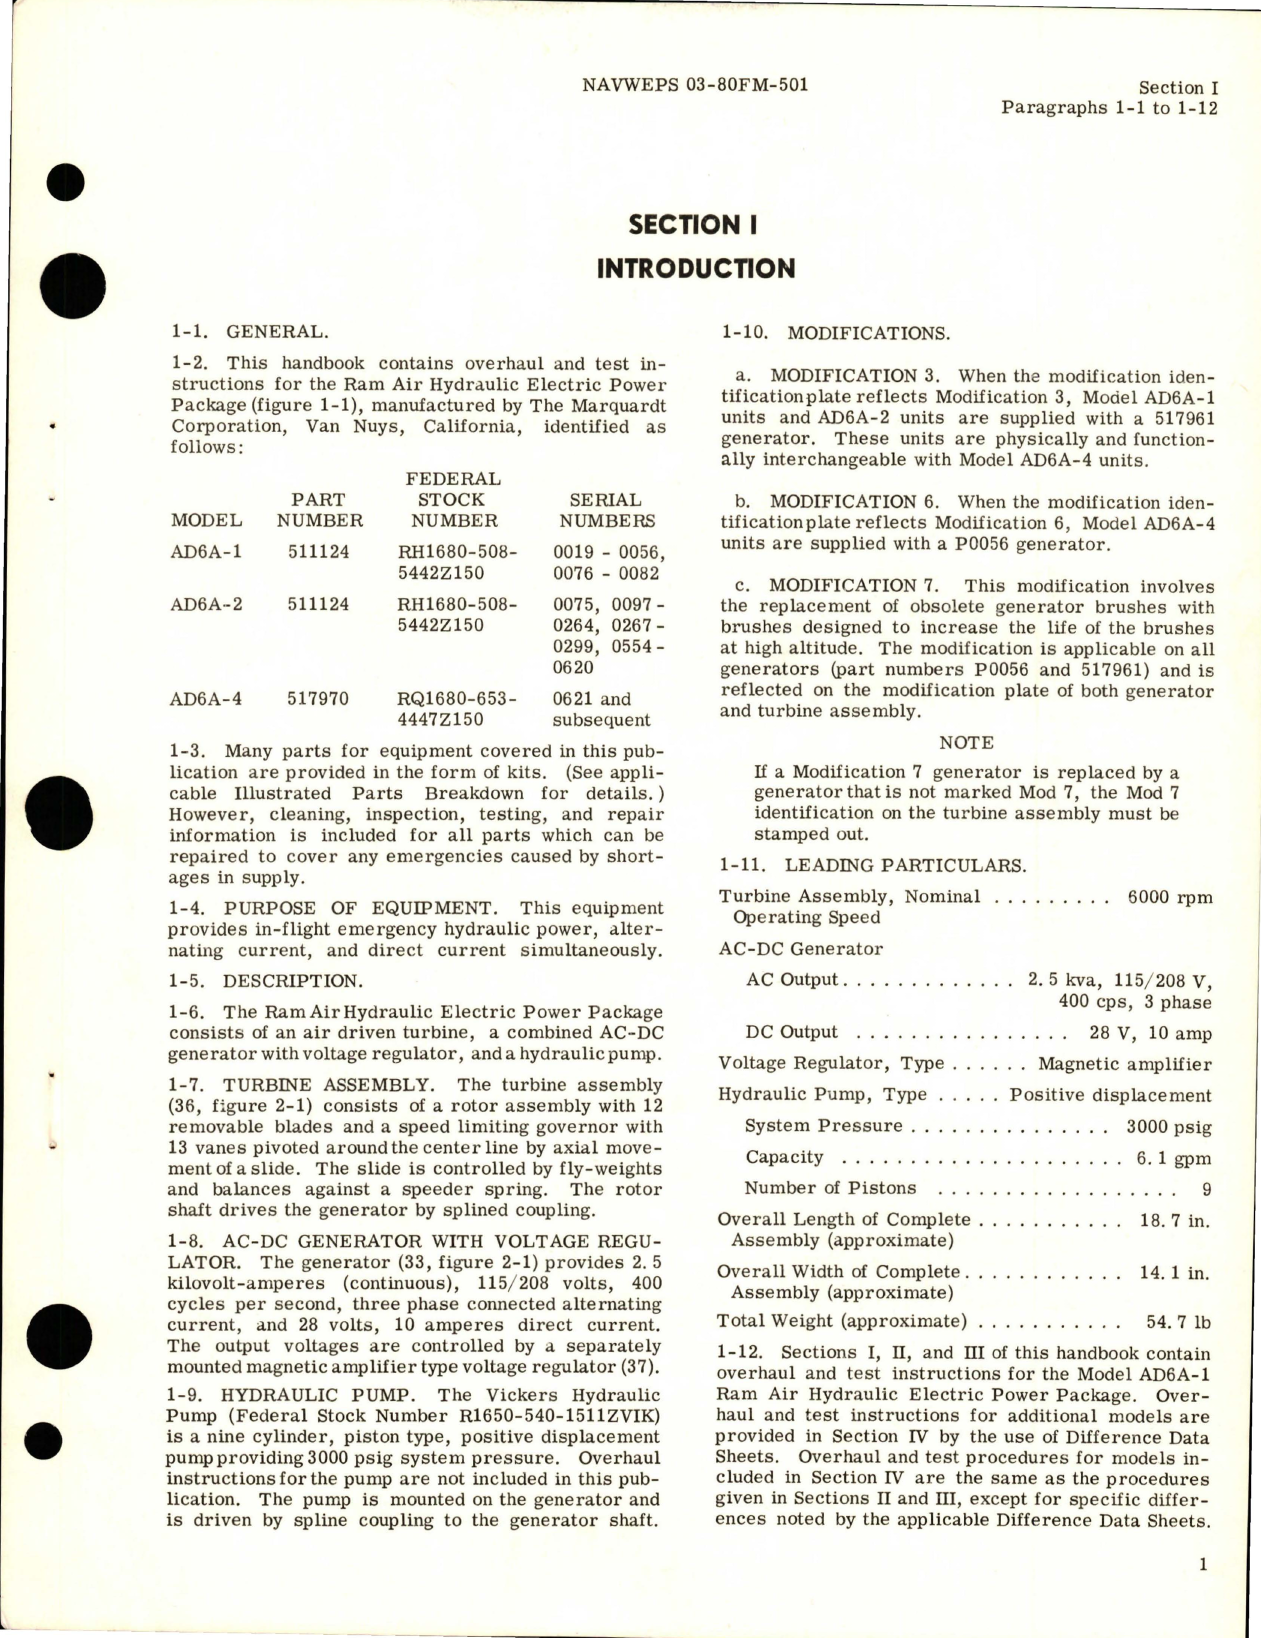 Sample page 5 from AirCorps Library document: Overhaul Instructions for Ram Air Hydraulic Electric Power Package - Models AD6A-1, AD6A-2, and AD6A-4